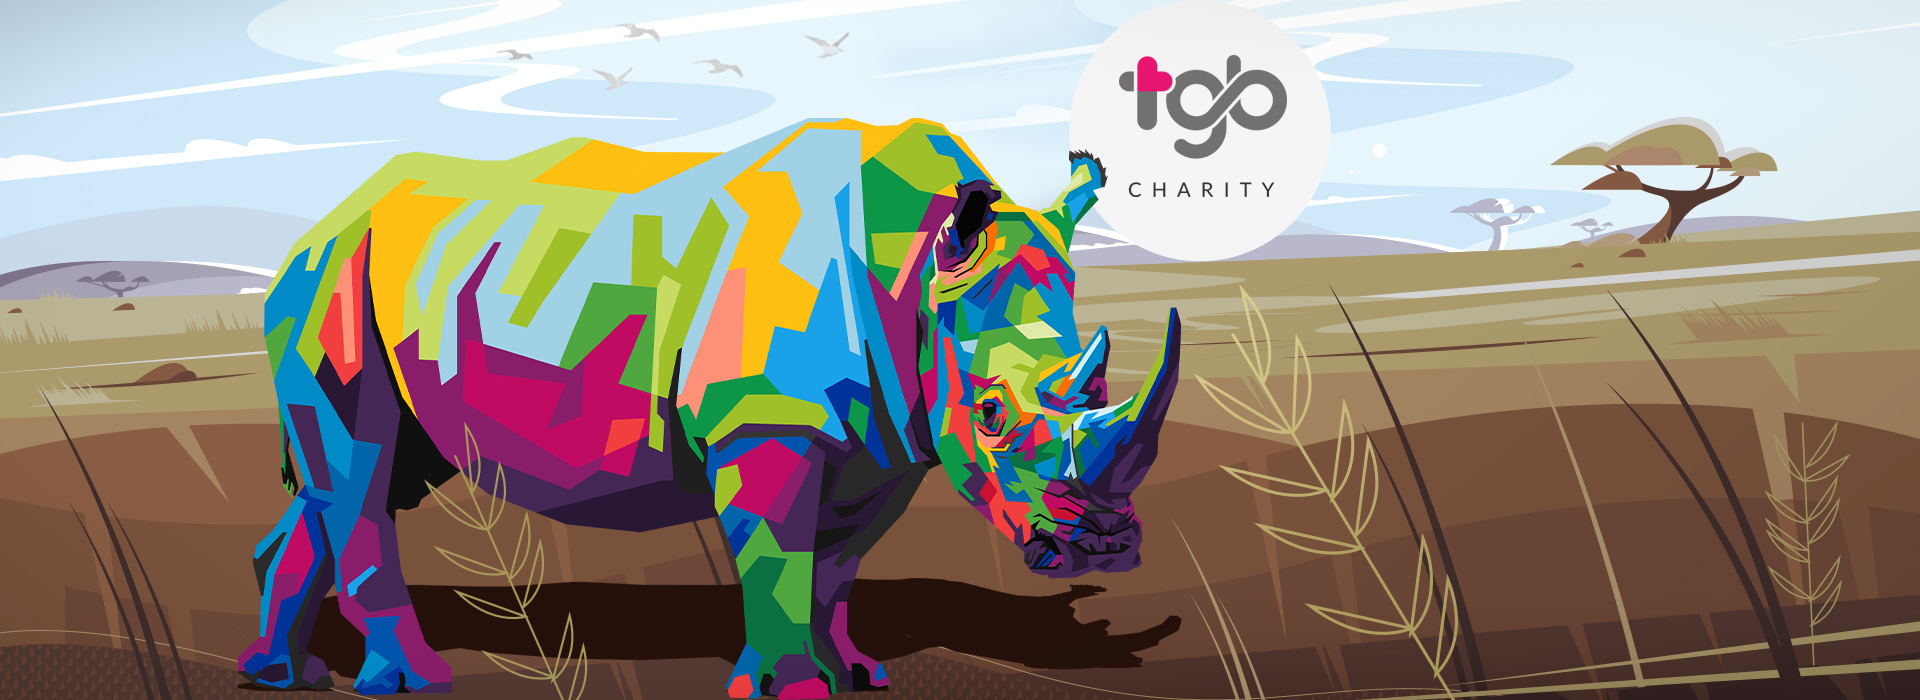 Rhinoceros: Magnificent Creature on the Brink of Extinction - TGB Charity